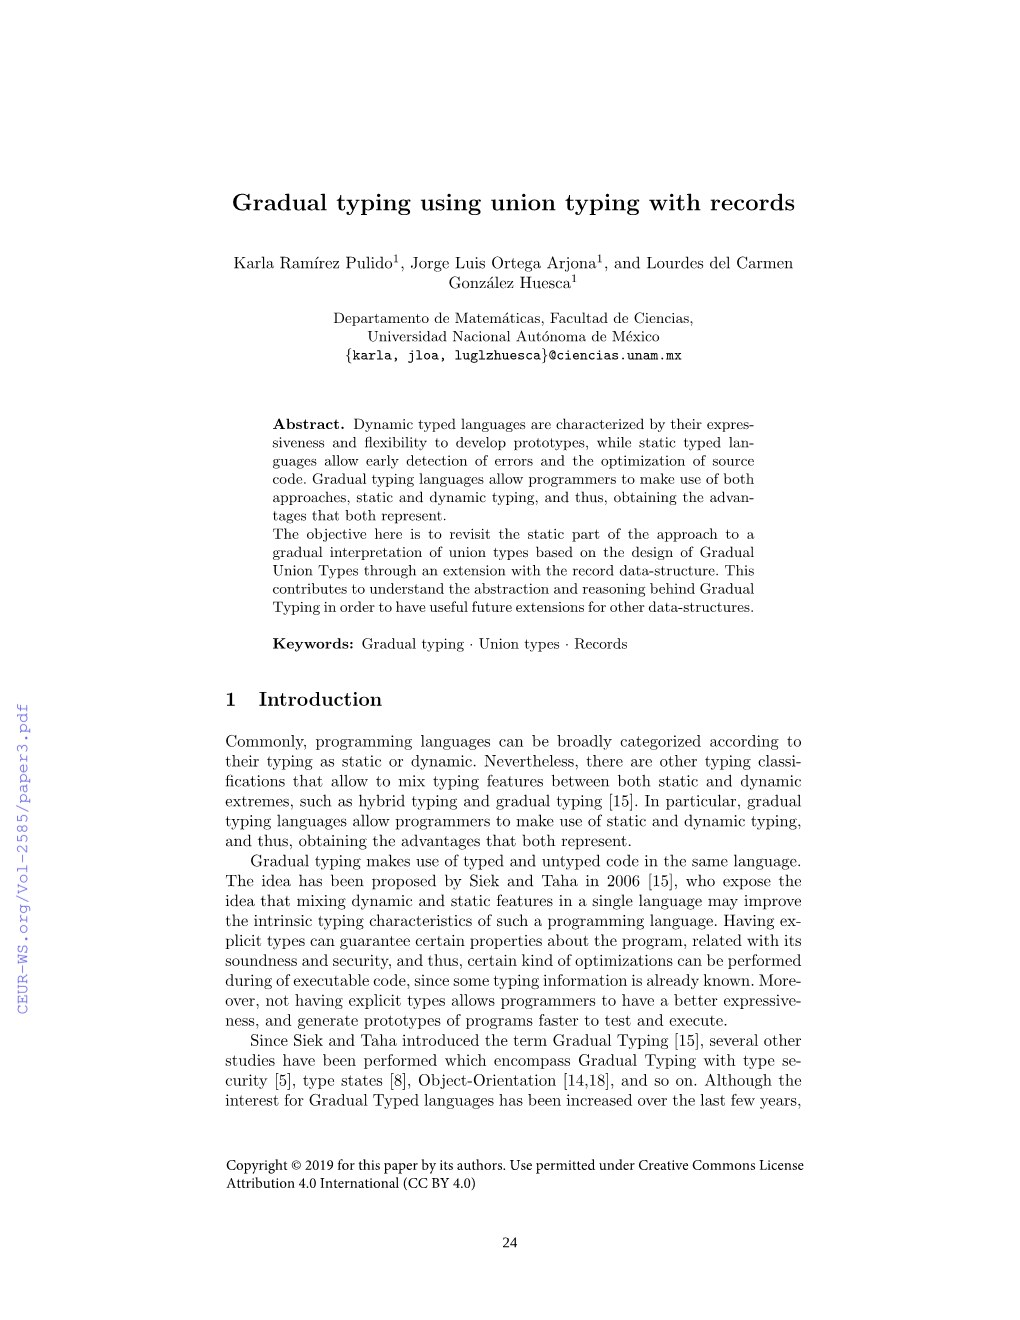 Gradual Typing Using Union Typing with Records